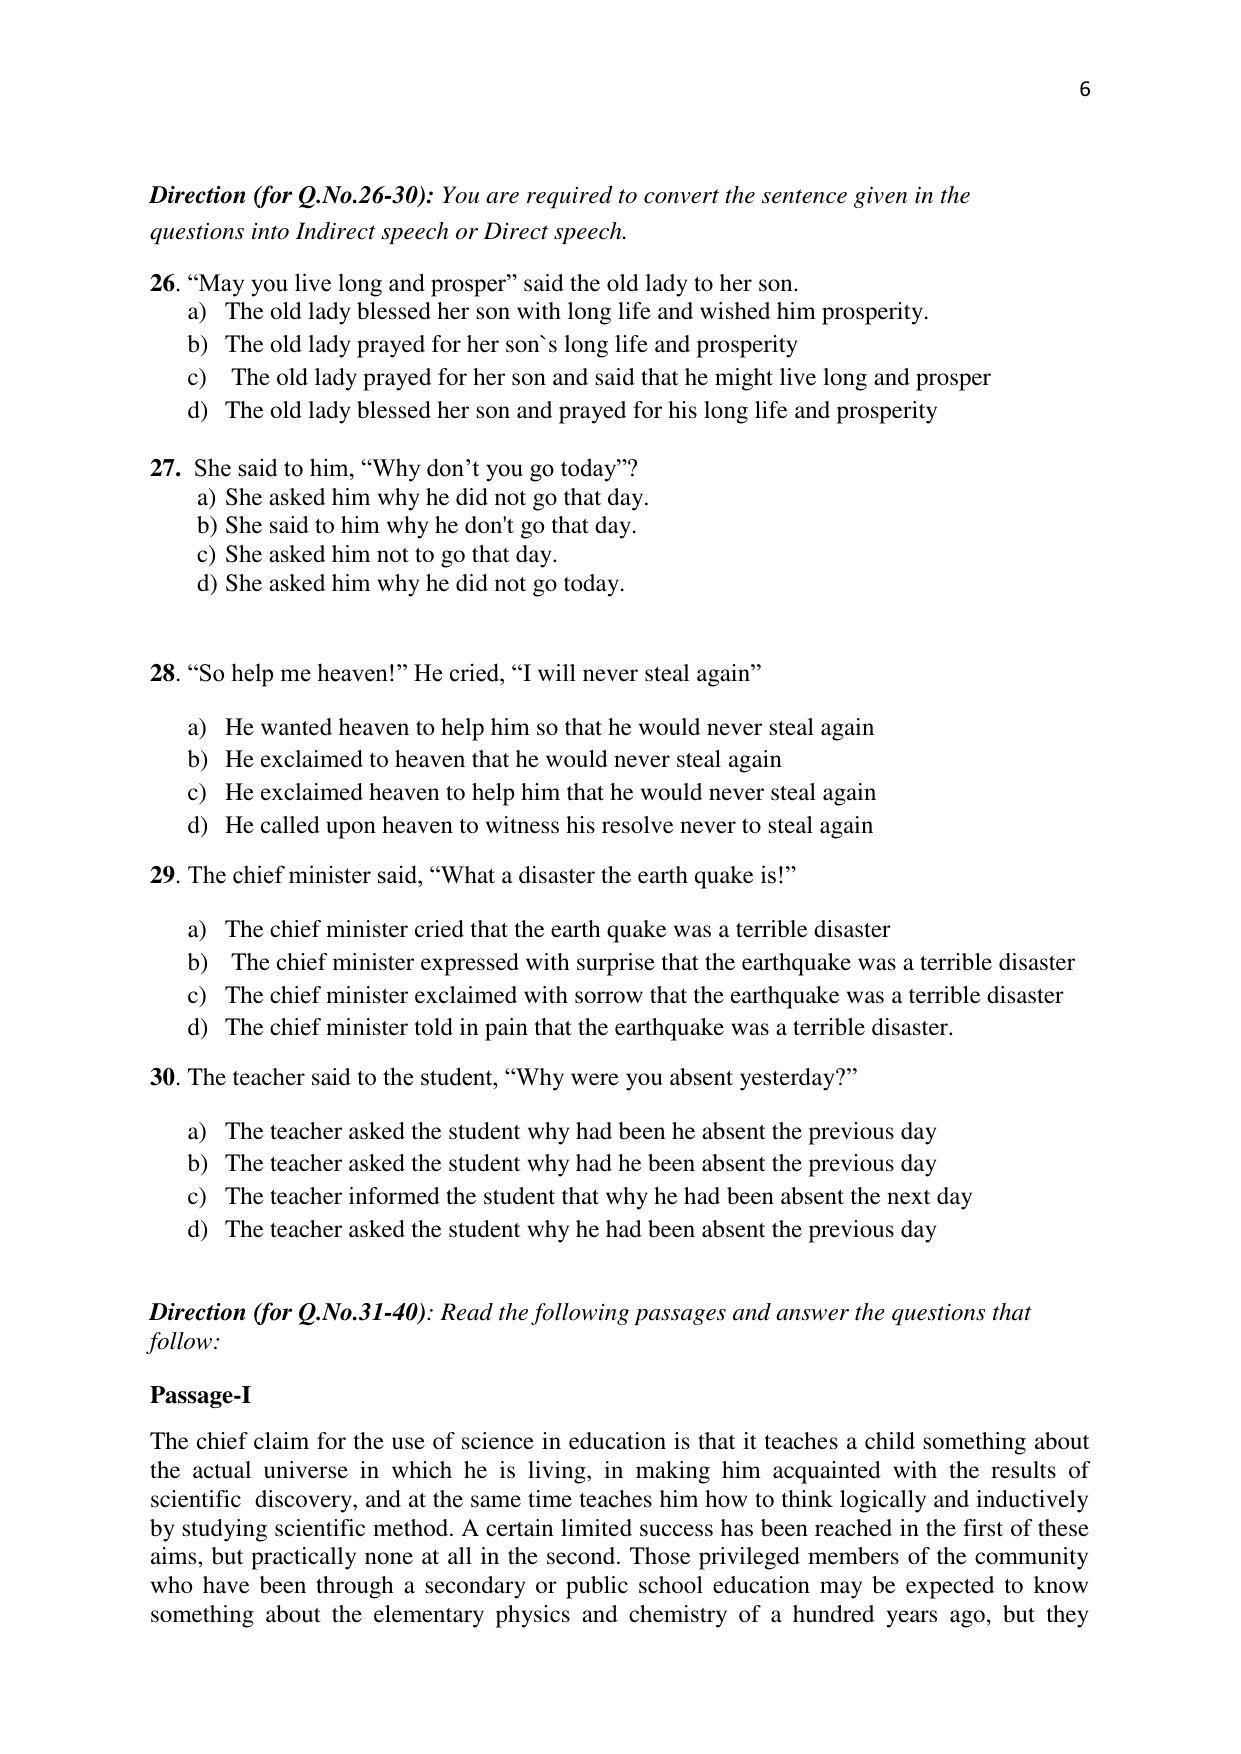 KMAT Question Papers - November 2016 - Page 6